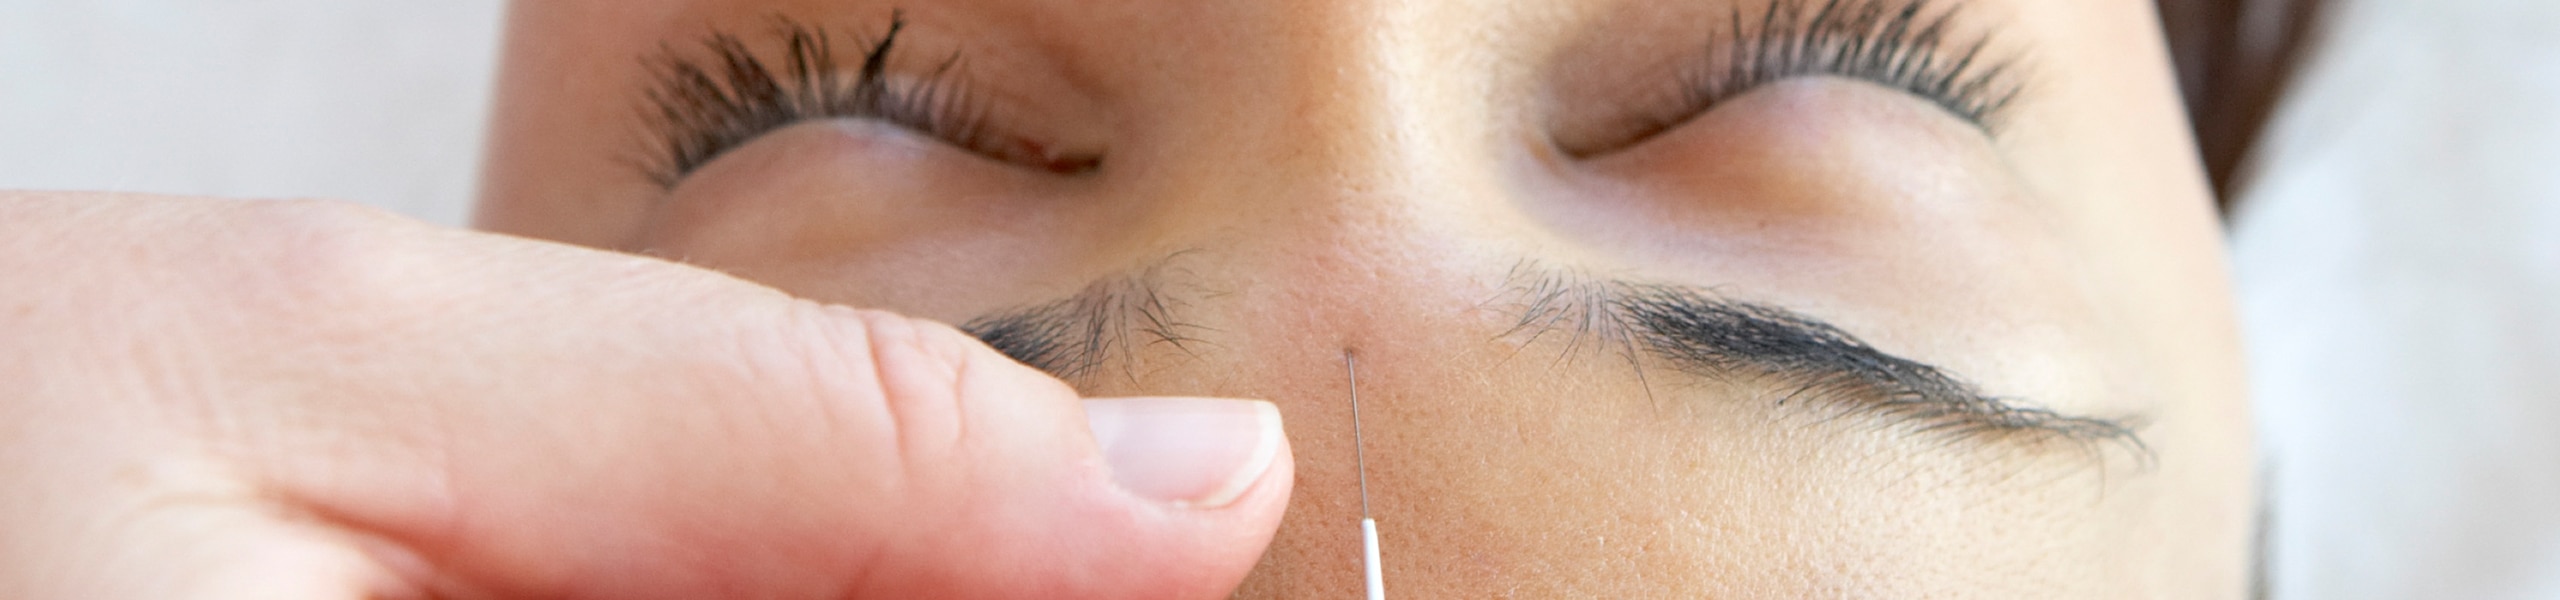 Hand placing acupuncture needle in woman's forehead